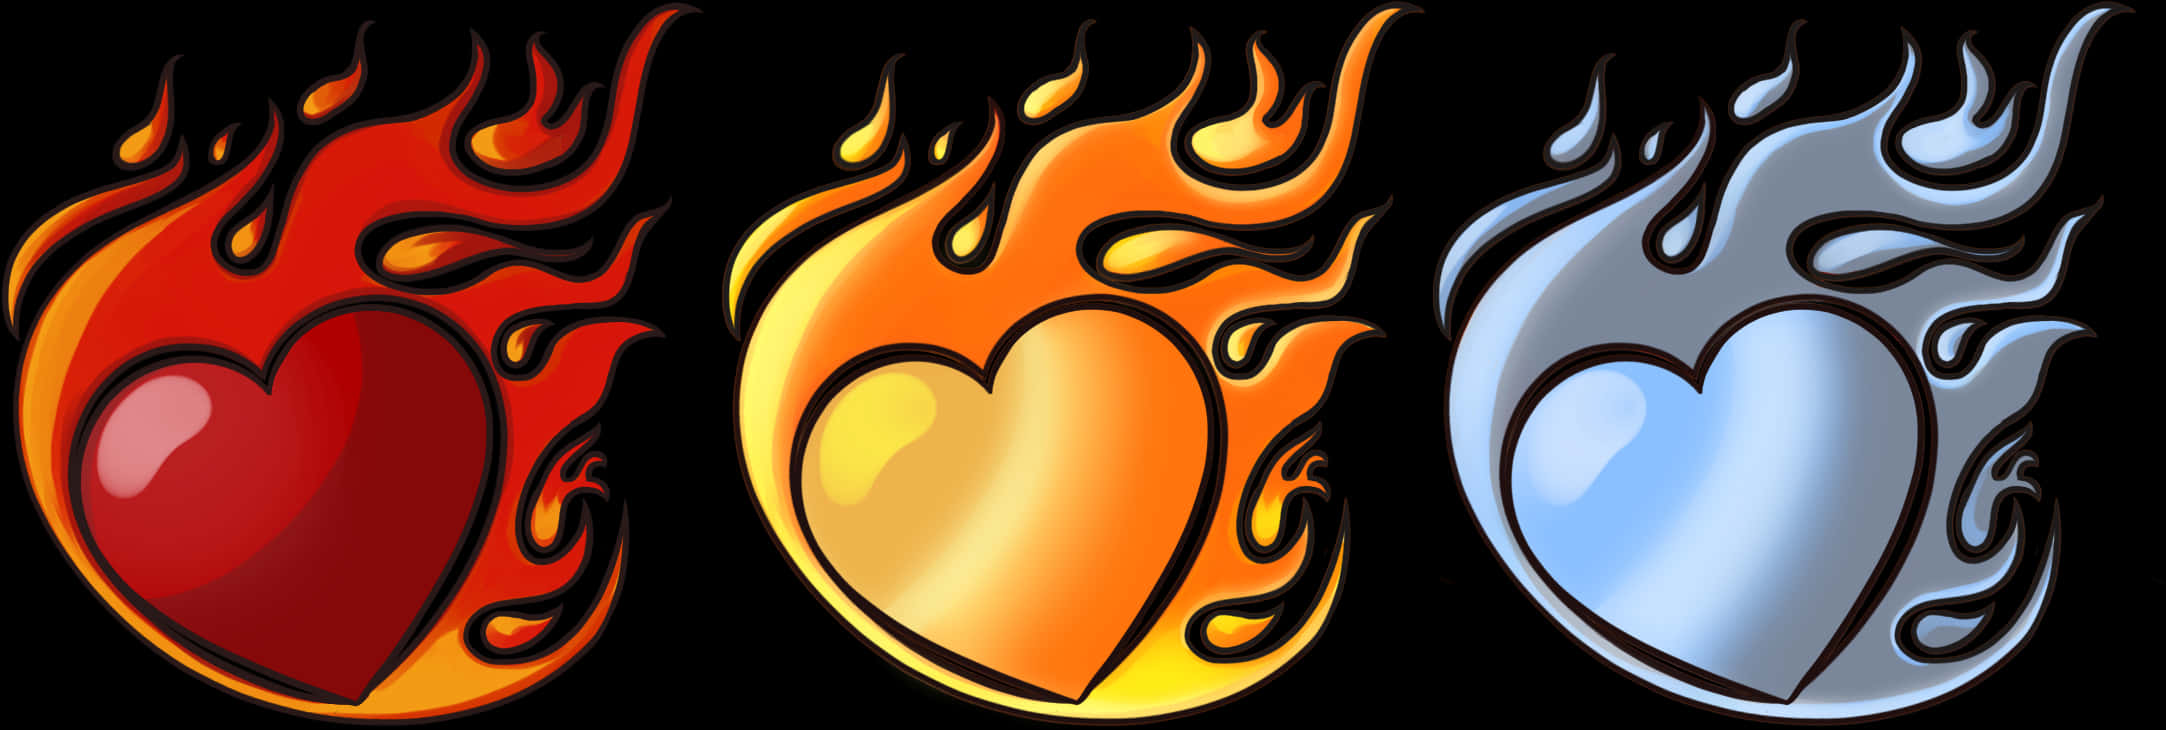 A Heart With Flames On It